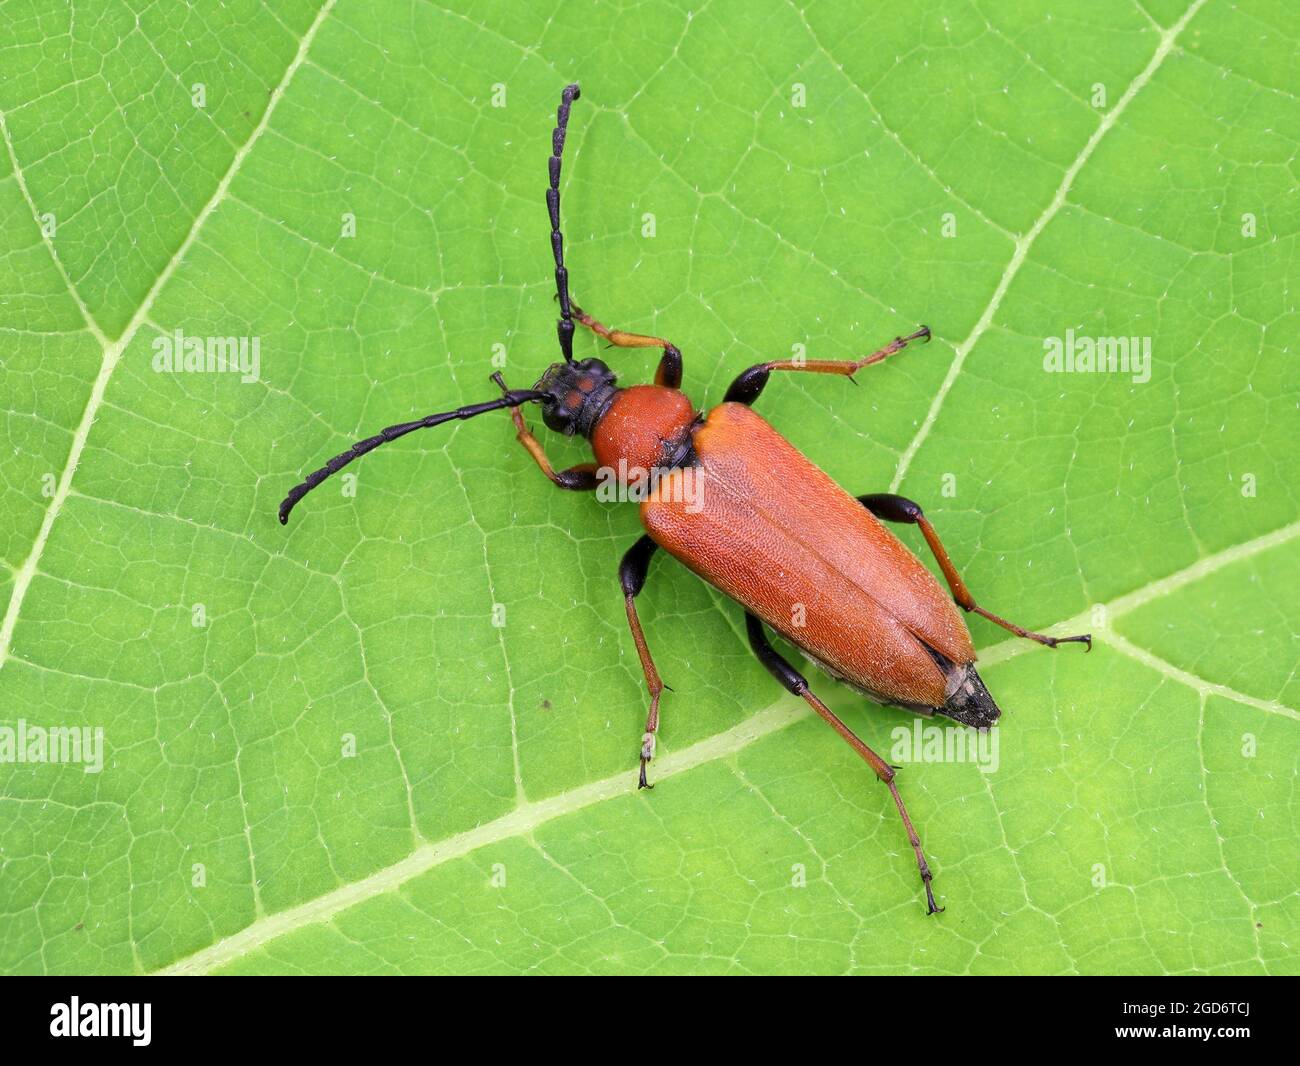 top view of stictoleptura rubra, the red-brown longhorn beetle, female, on green leaf, macro shot Stock Photo